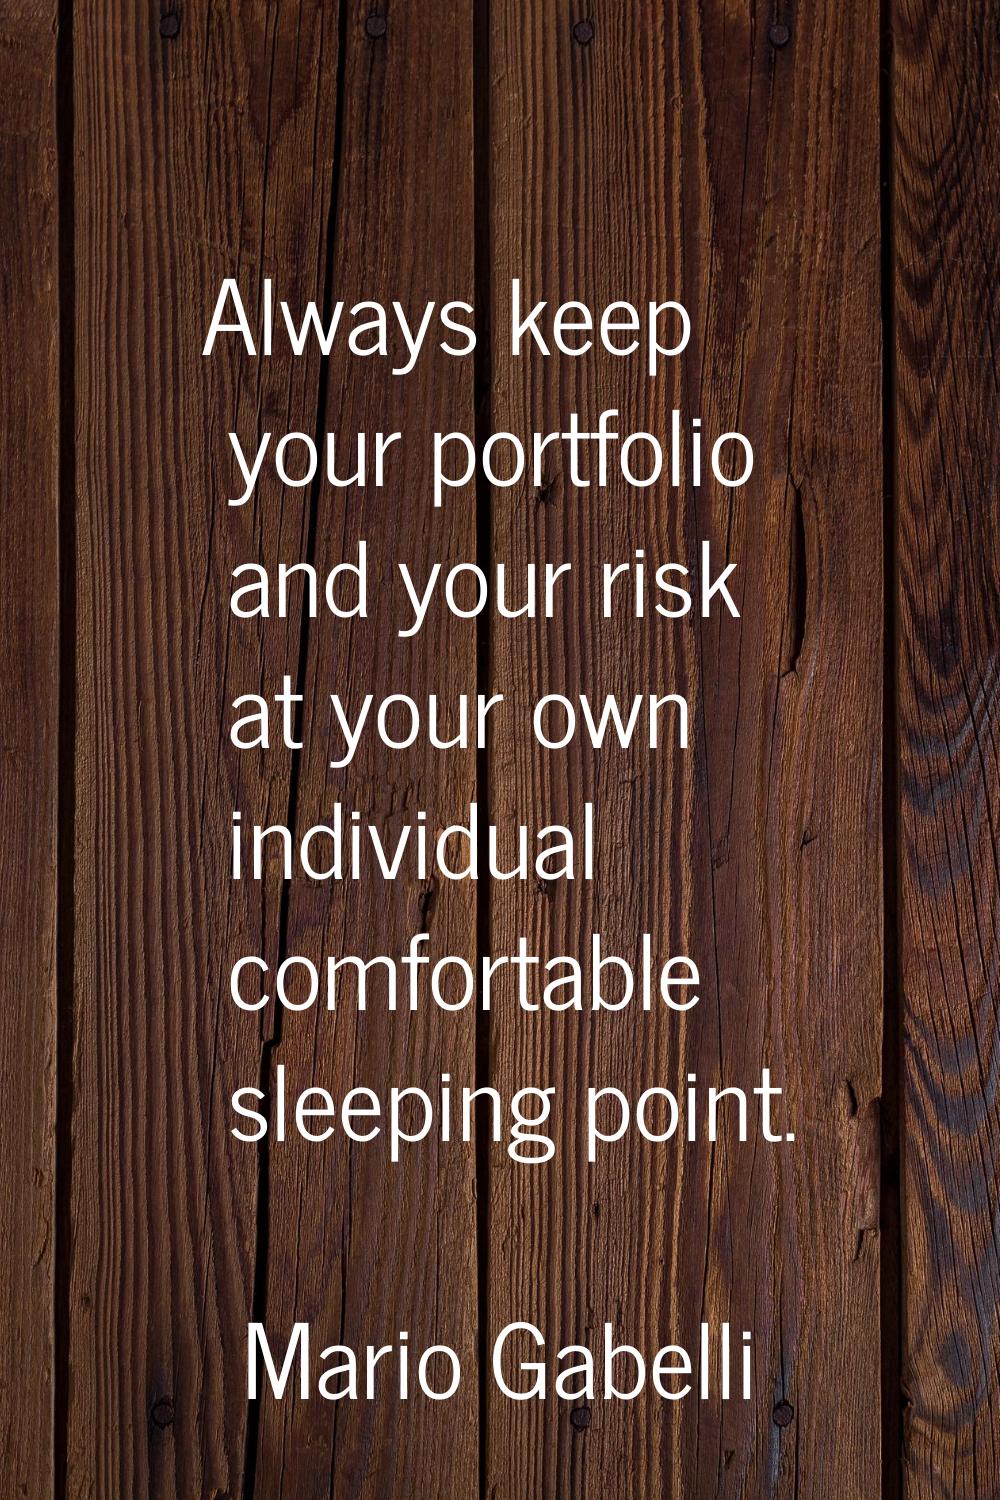 Always keep your portfolio and your risk at your own individual comfortable sleeping point.